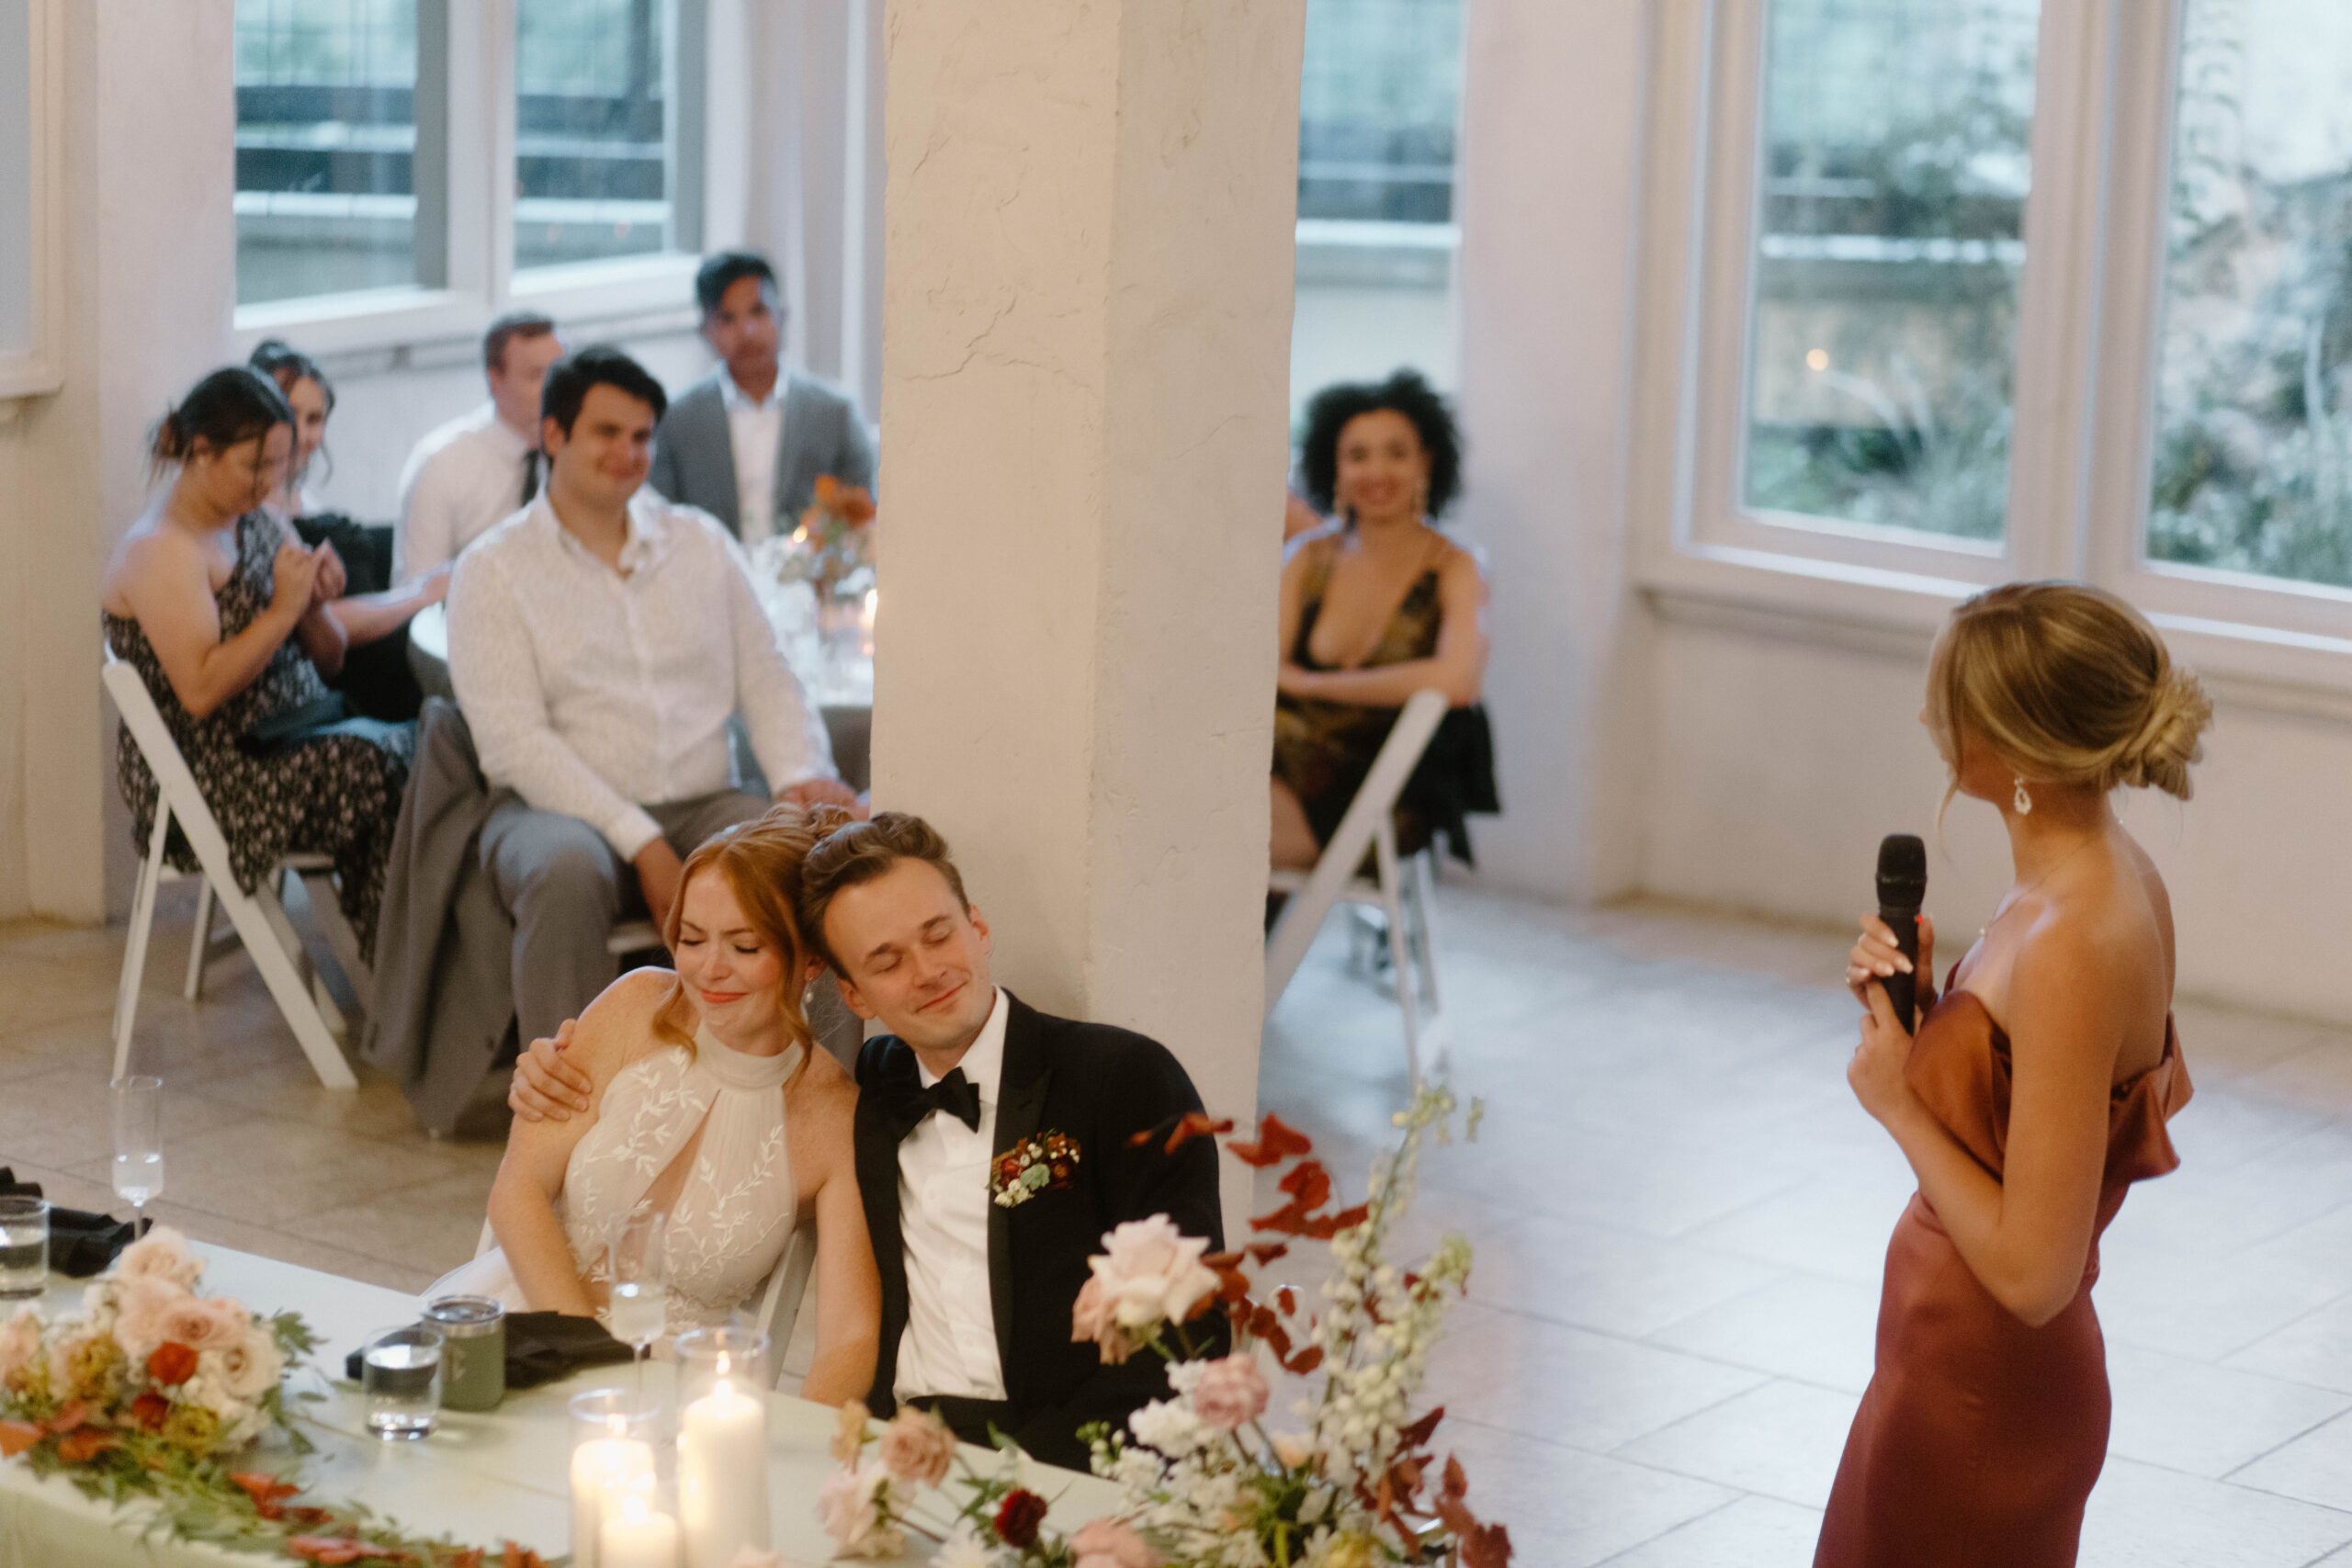 Newlyweds laughing during toasts at their wedding. The wedding took place at Villa Antonia in Austin Texas. They are enjoying a candlelit dinner with fresh florals and green linens. 